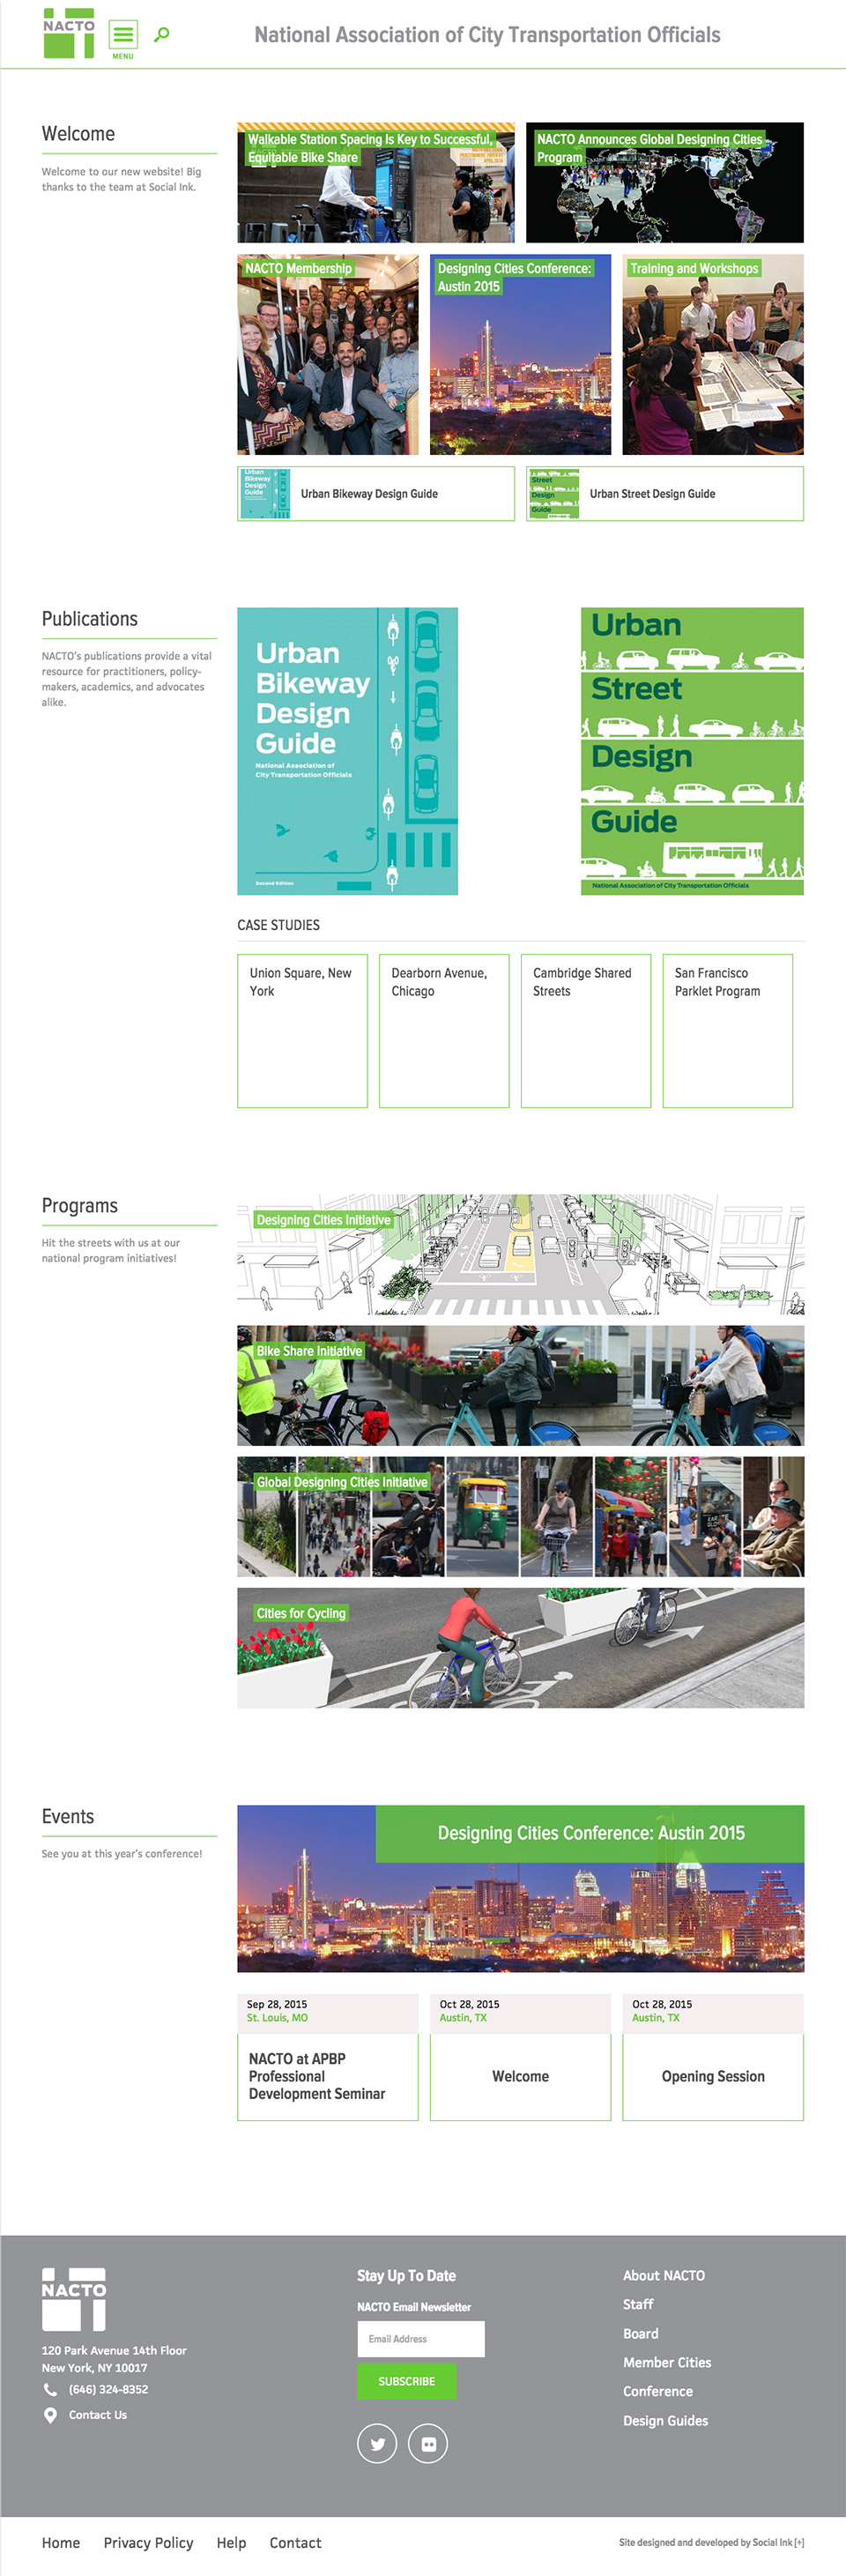 National Association of City Transportation Officials (NACTO): National Association of City Transportation Officials Homepage